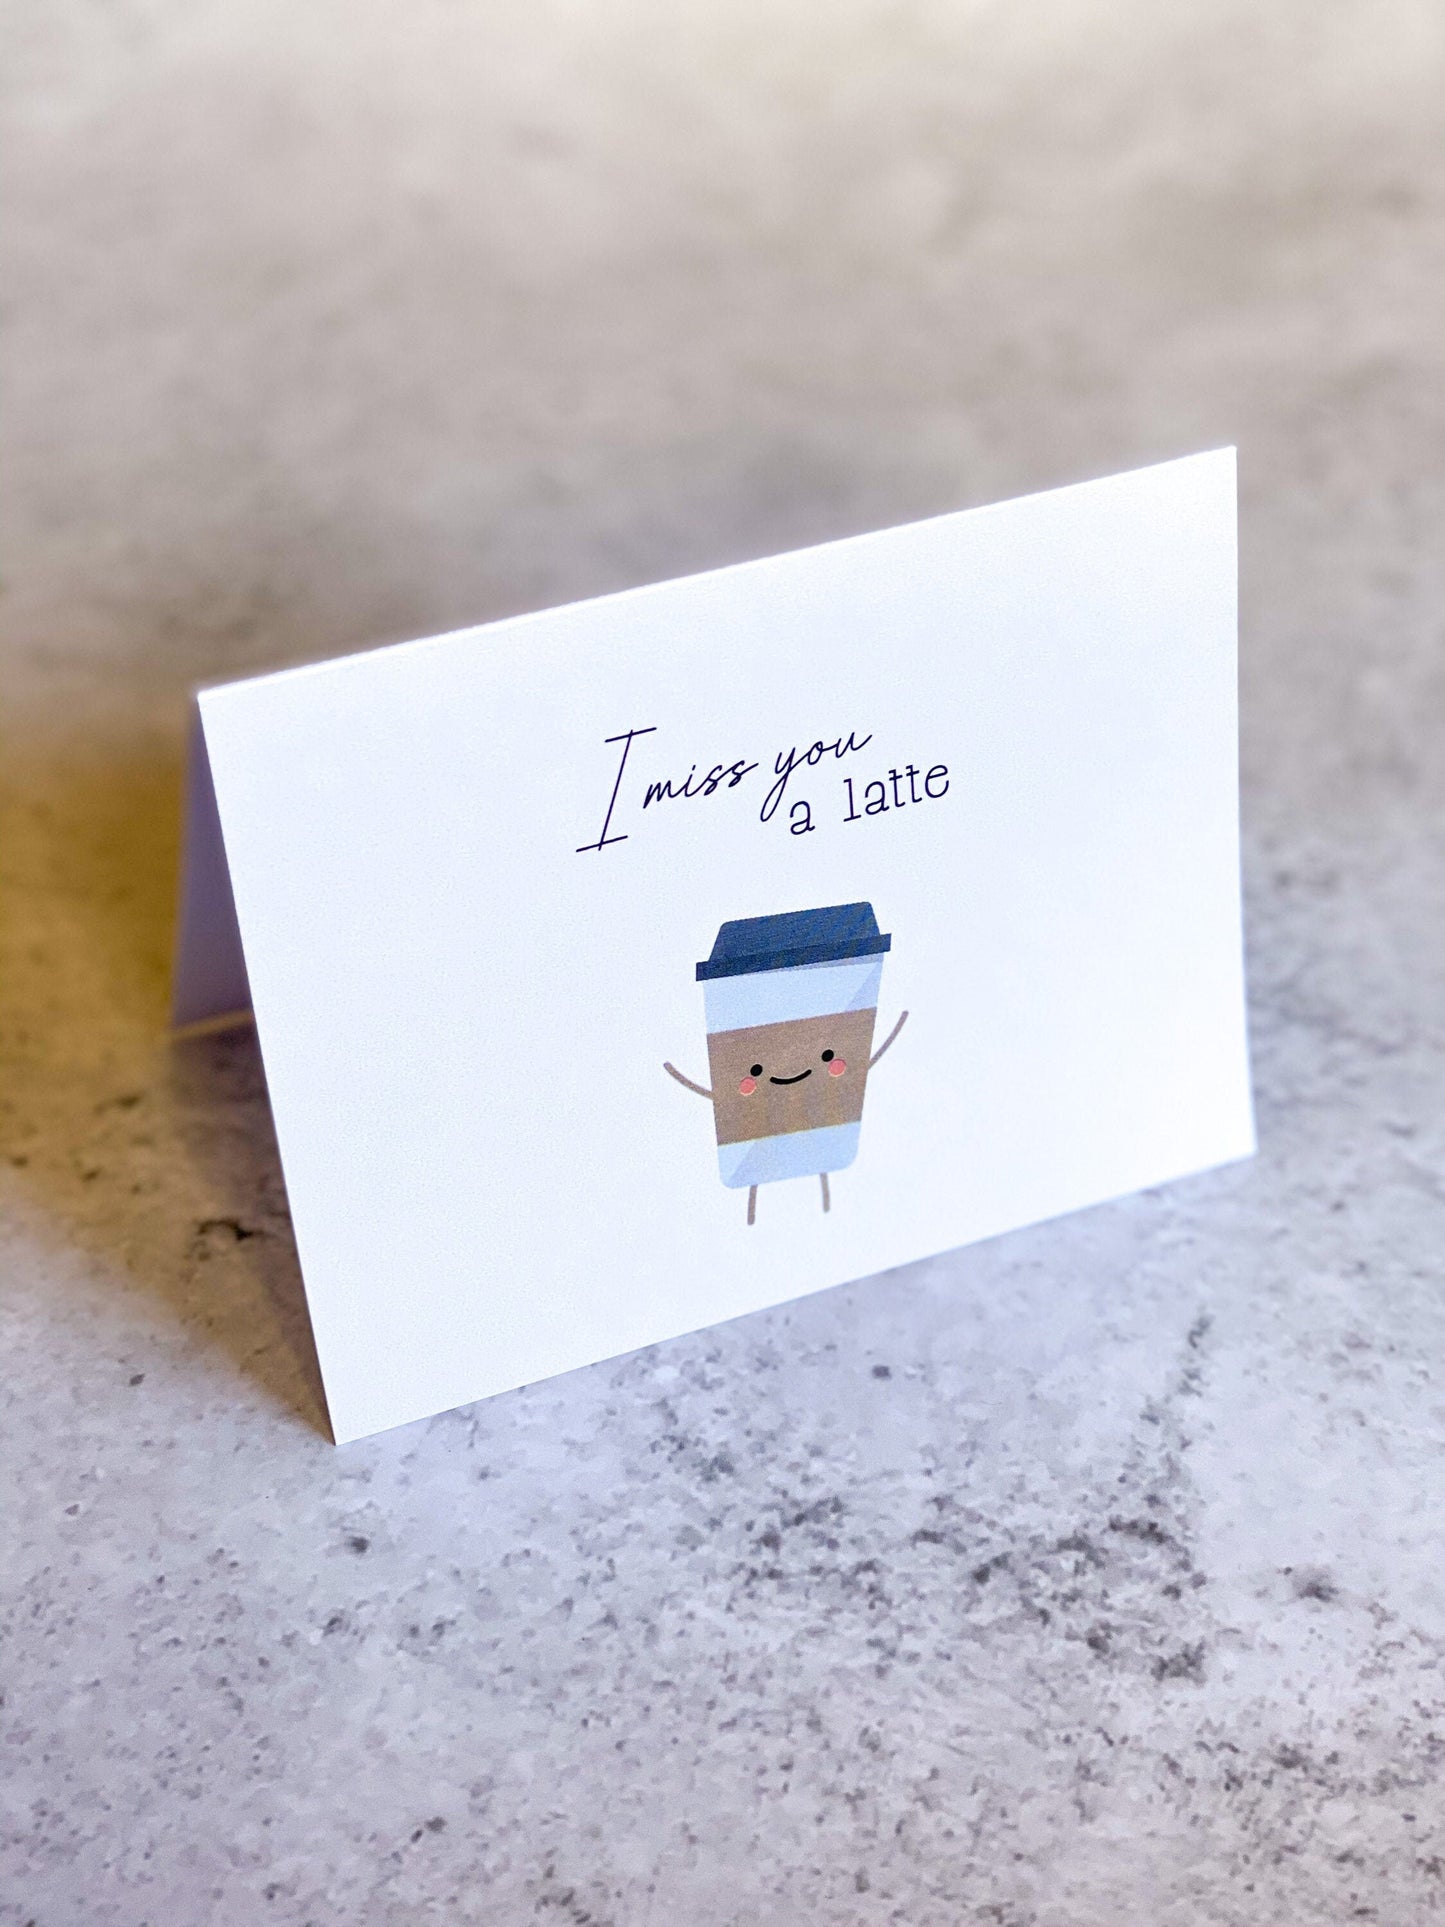 I Miss You a Latte card